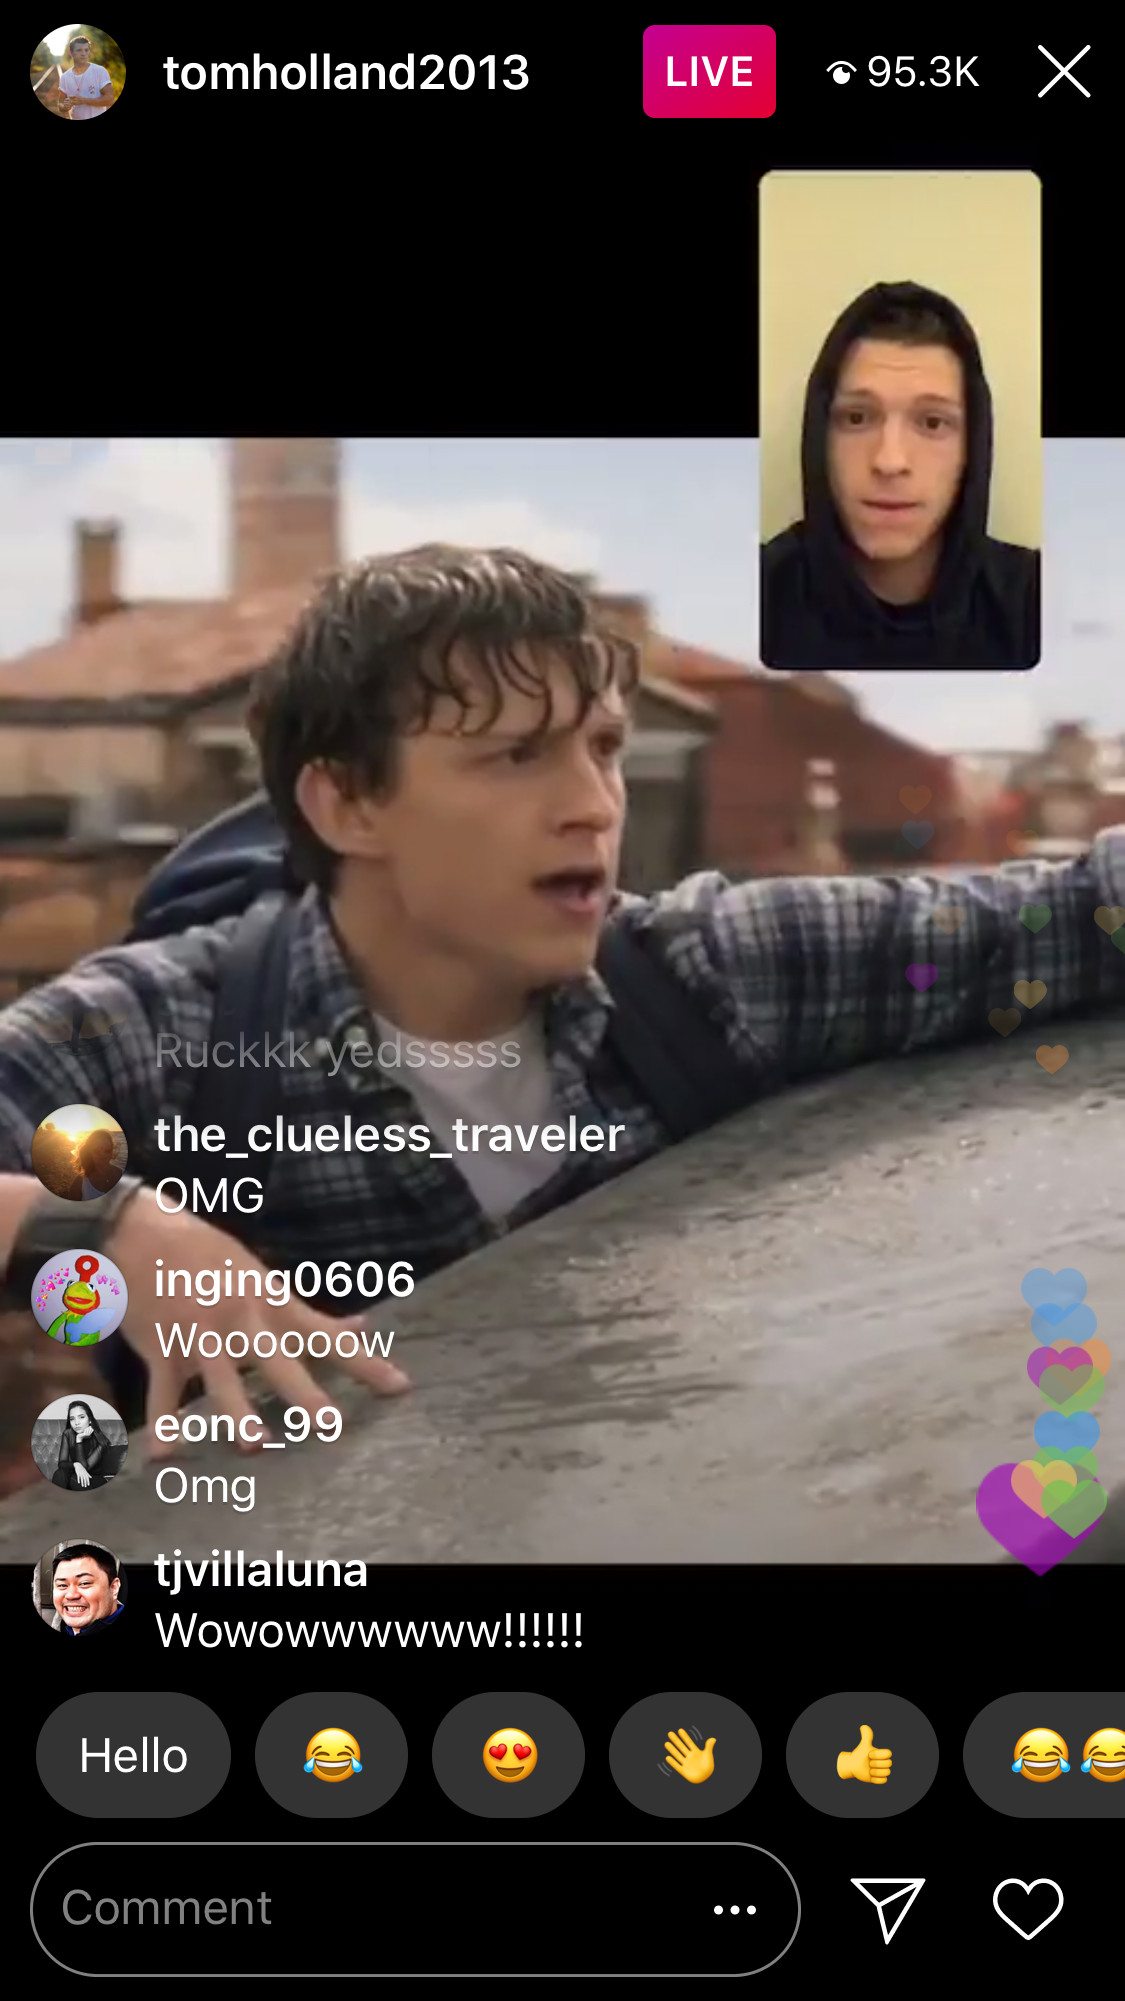 Spider-Man: Far From Home Trailer Now Online